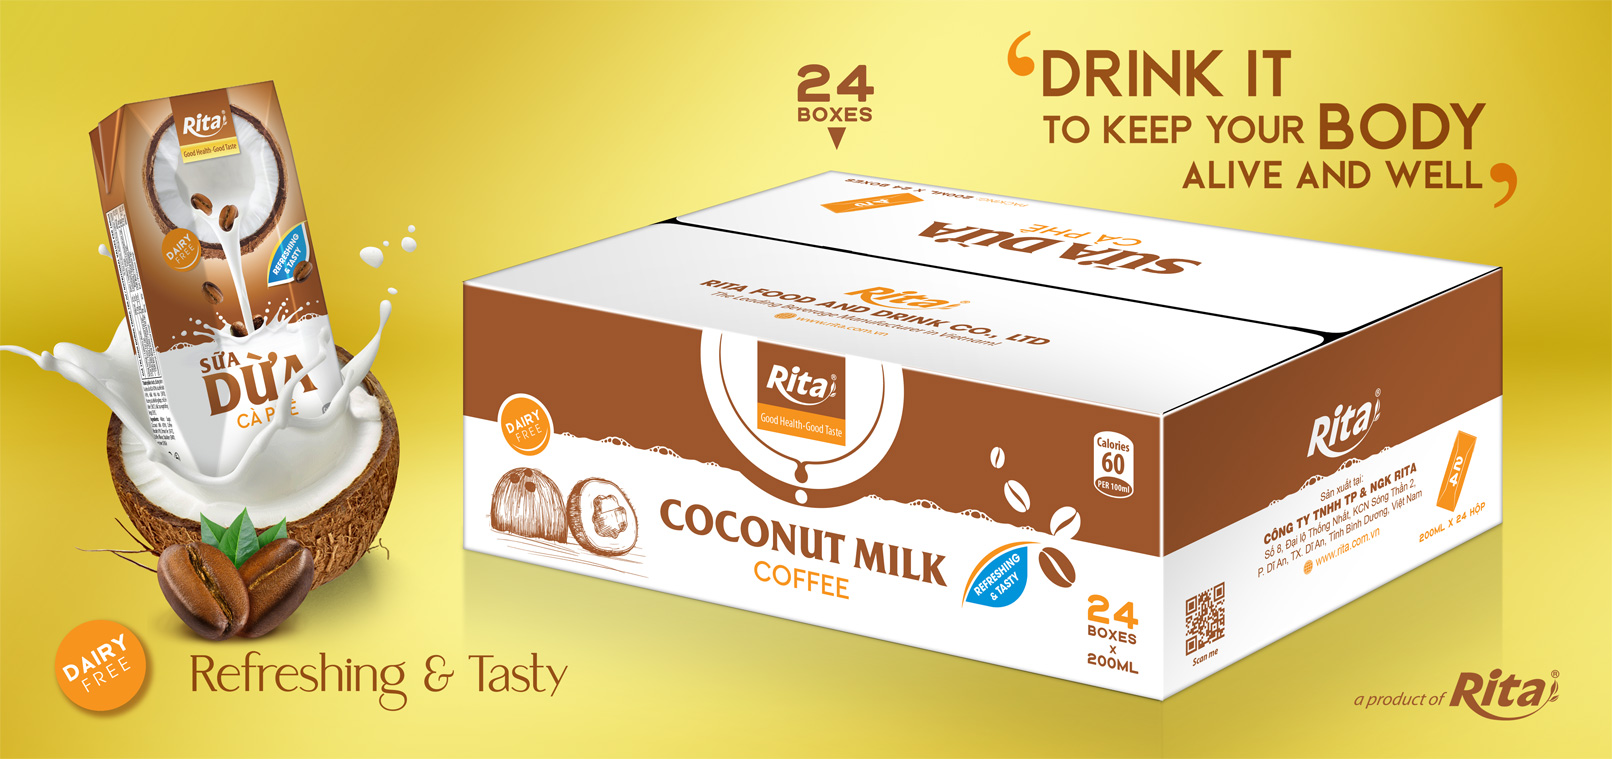 Coconut milk with coffee flavor